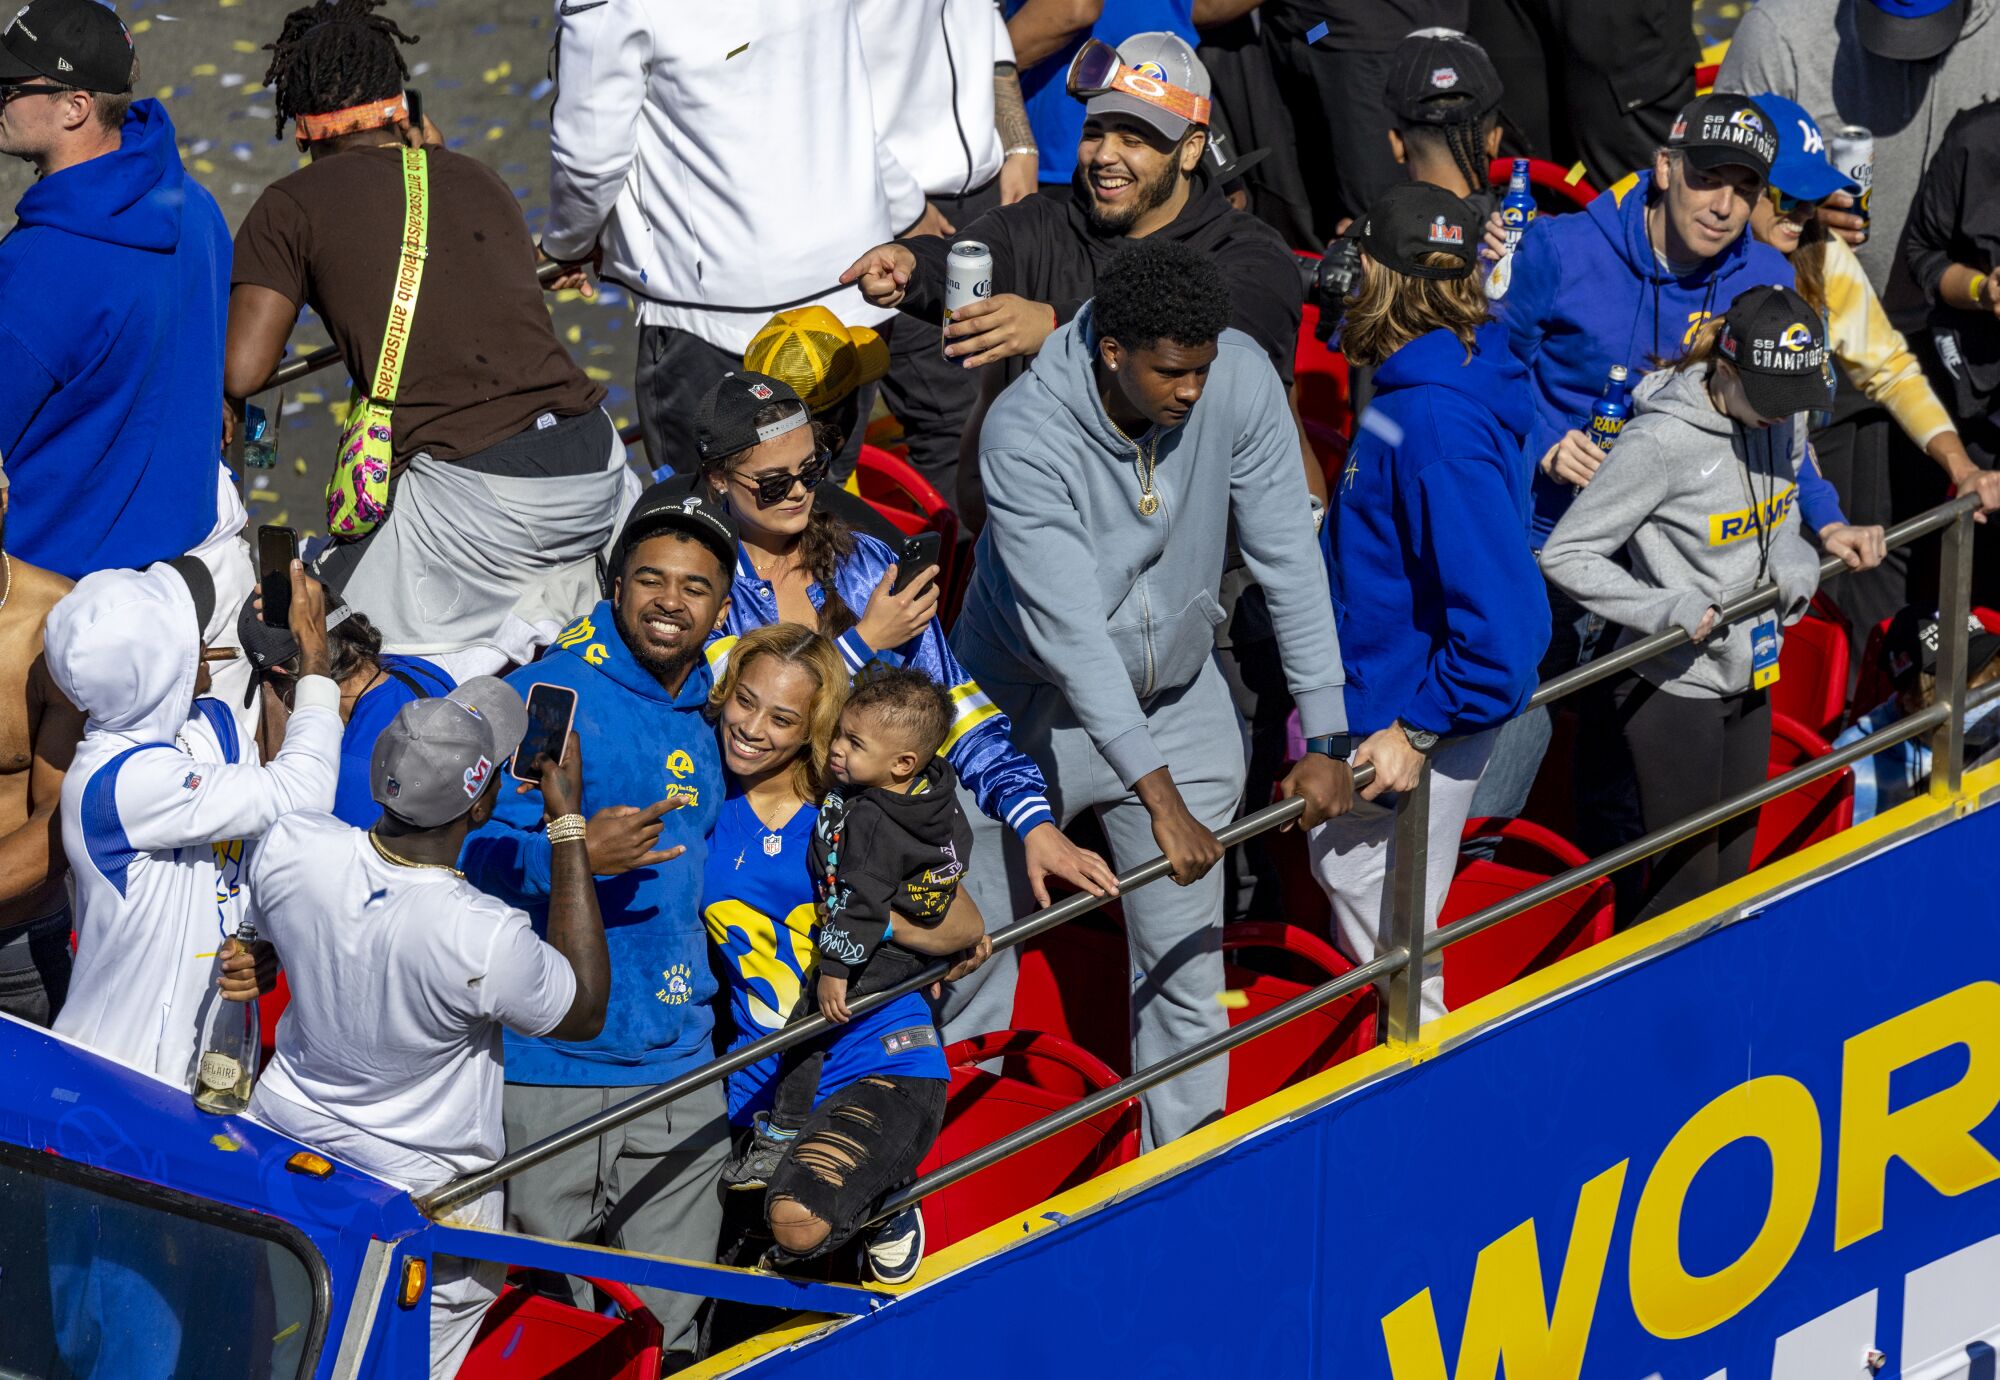 A Rams player gets his photo taken with family aboard double-decker buses during the Rams victory parade.